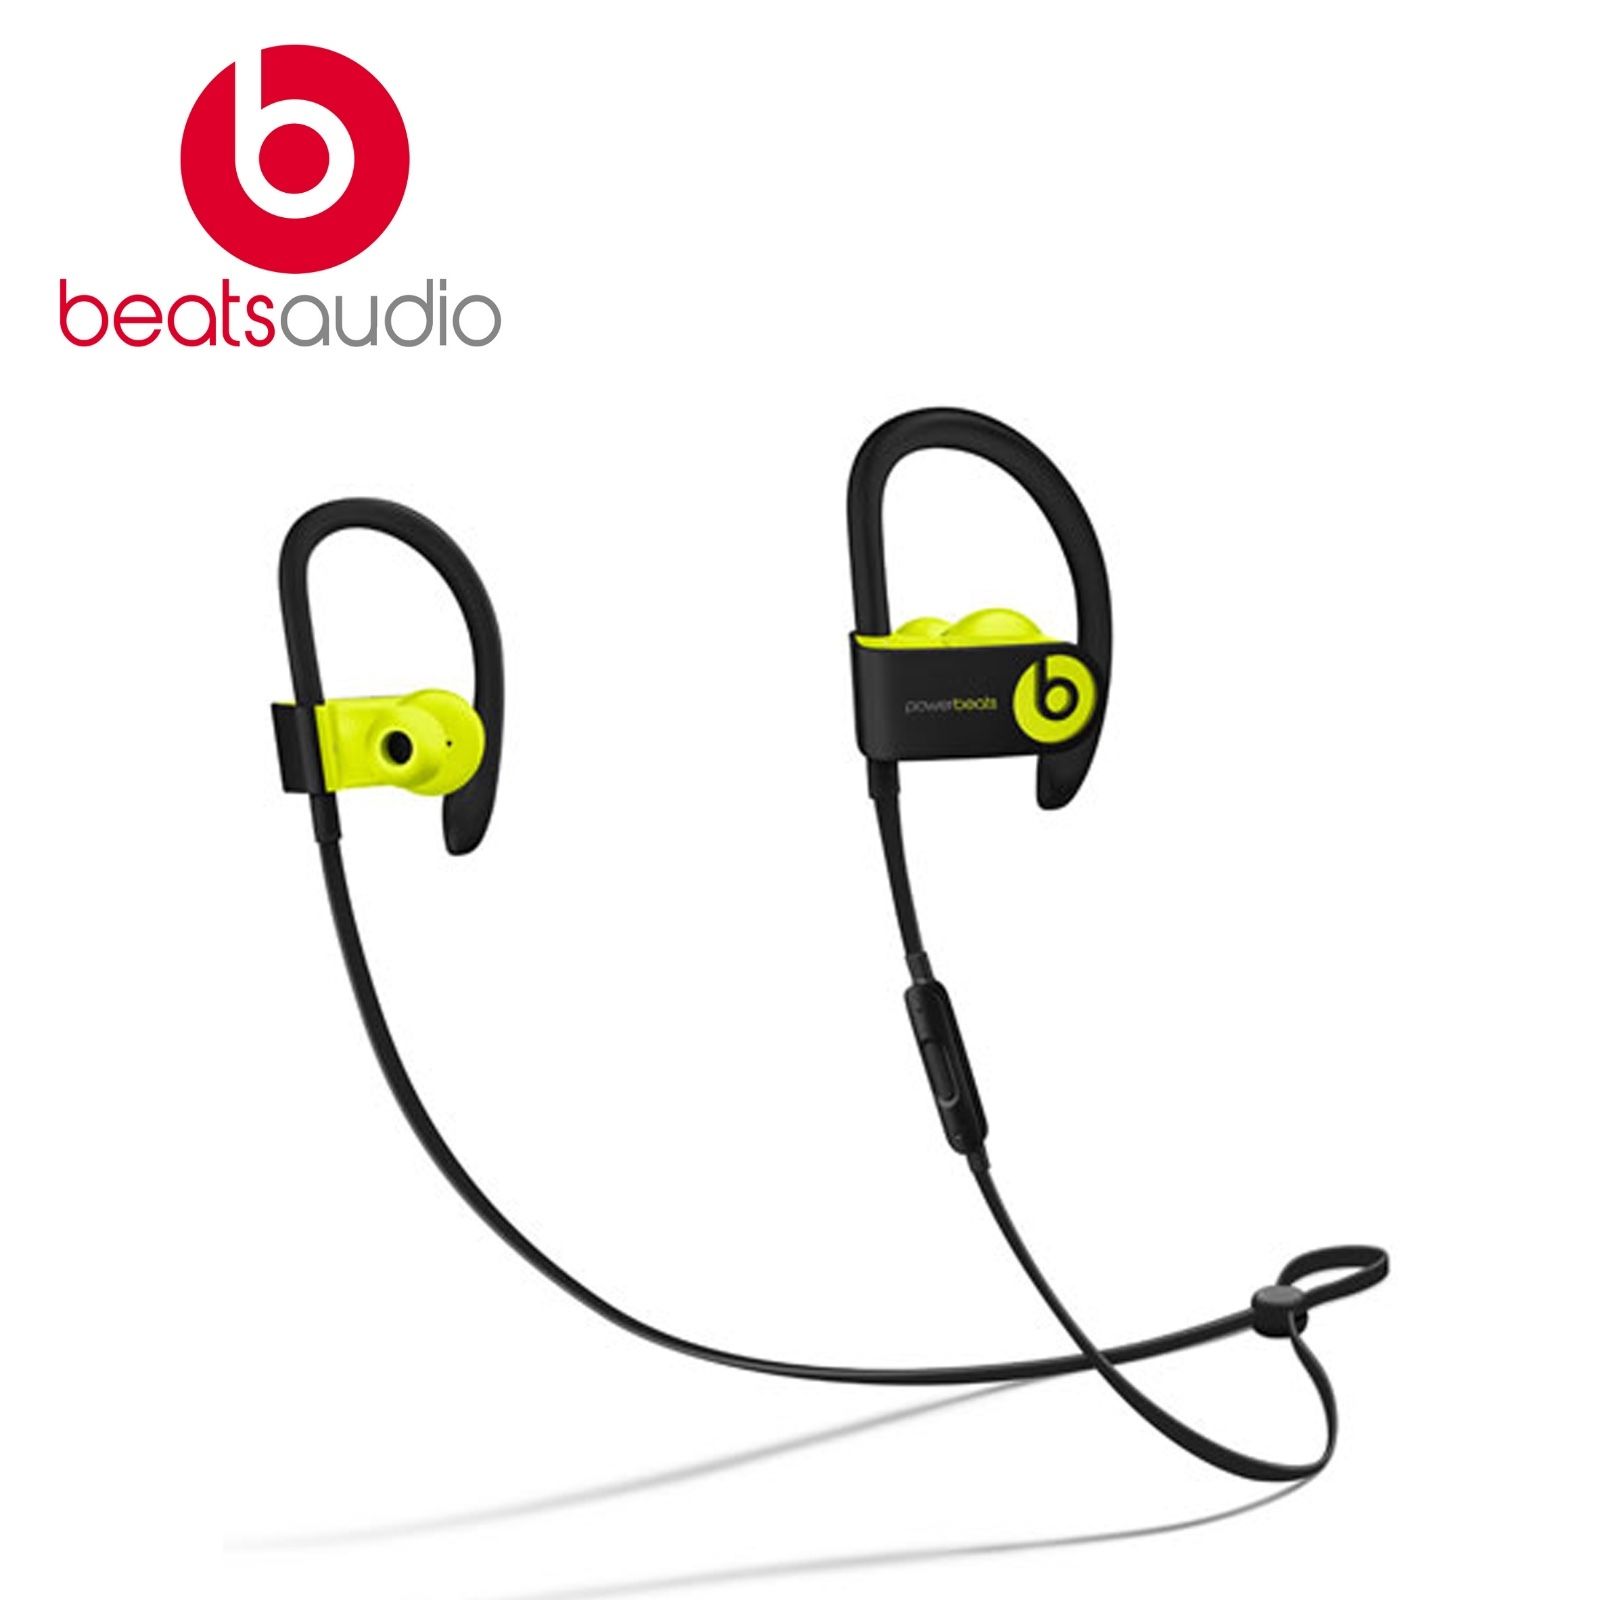 Beats by Dr Dre Powerbeats 3 Wireless Earphones Yellow AU Stock Free Gift 112479455876 5 Apple Powerbeat Headphones Are Duds Claims Consumers